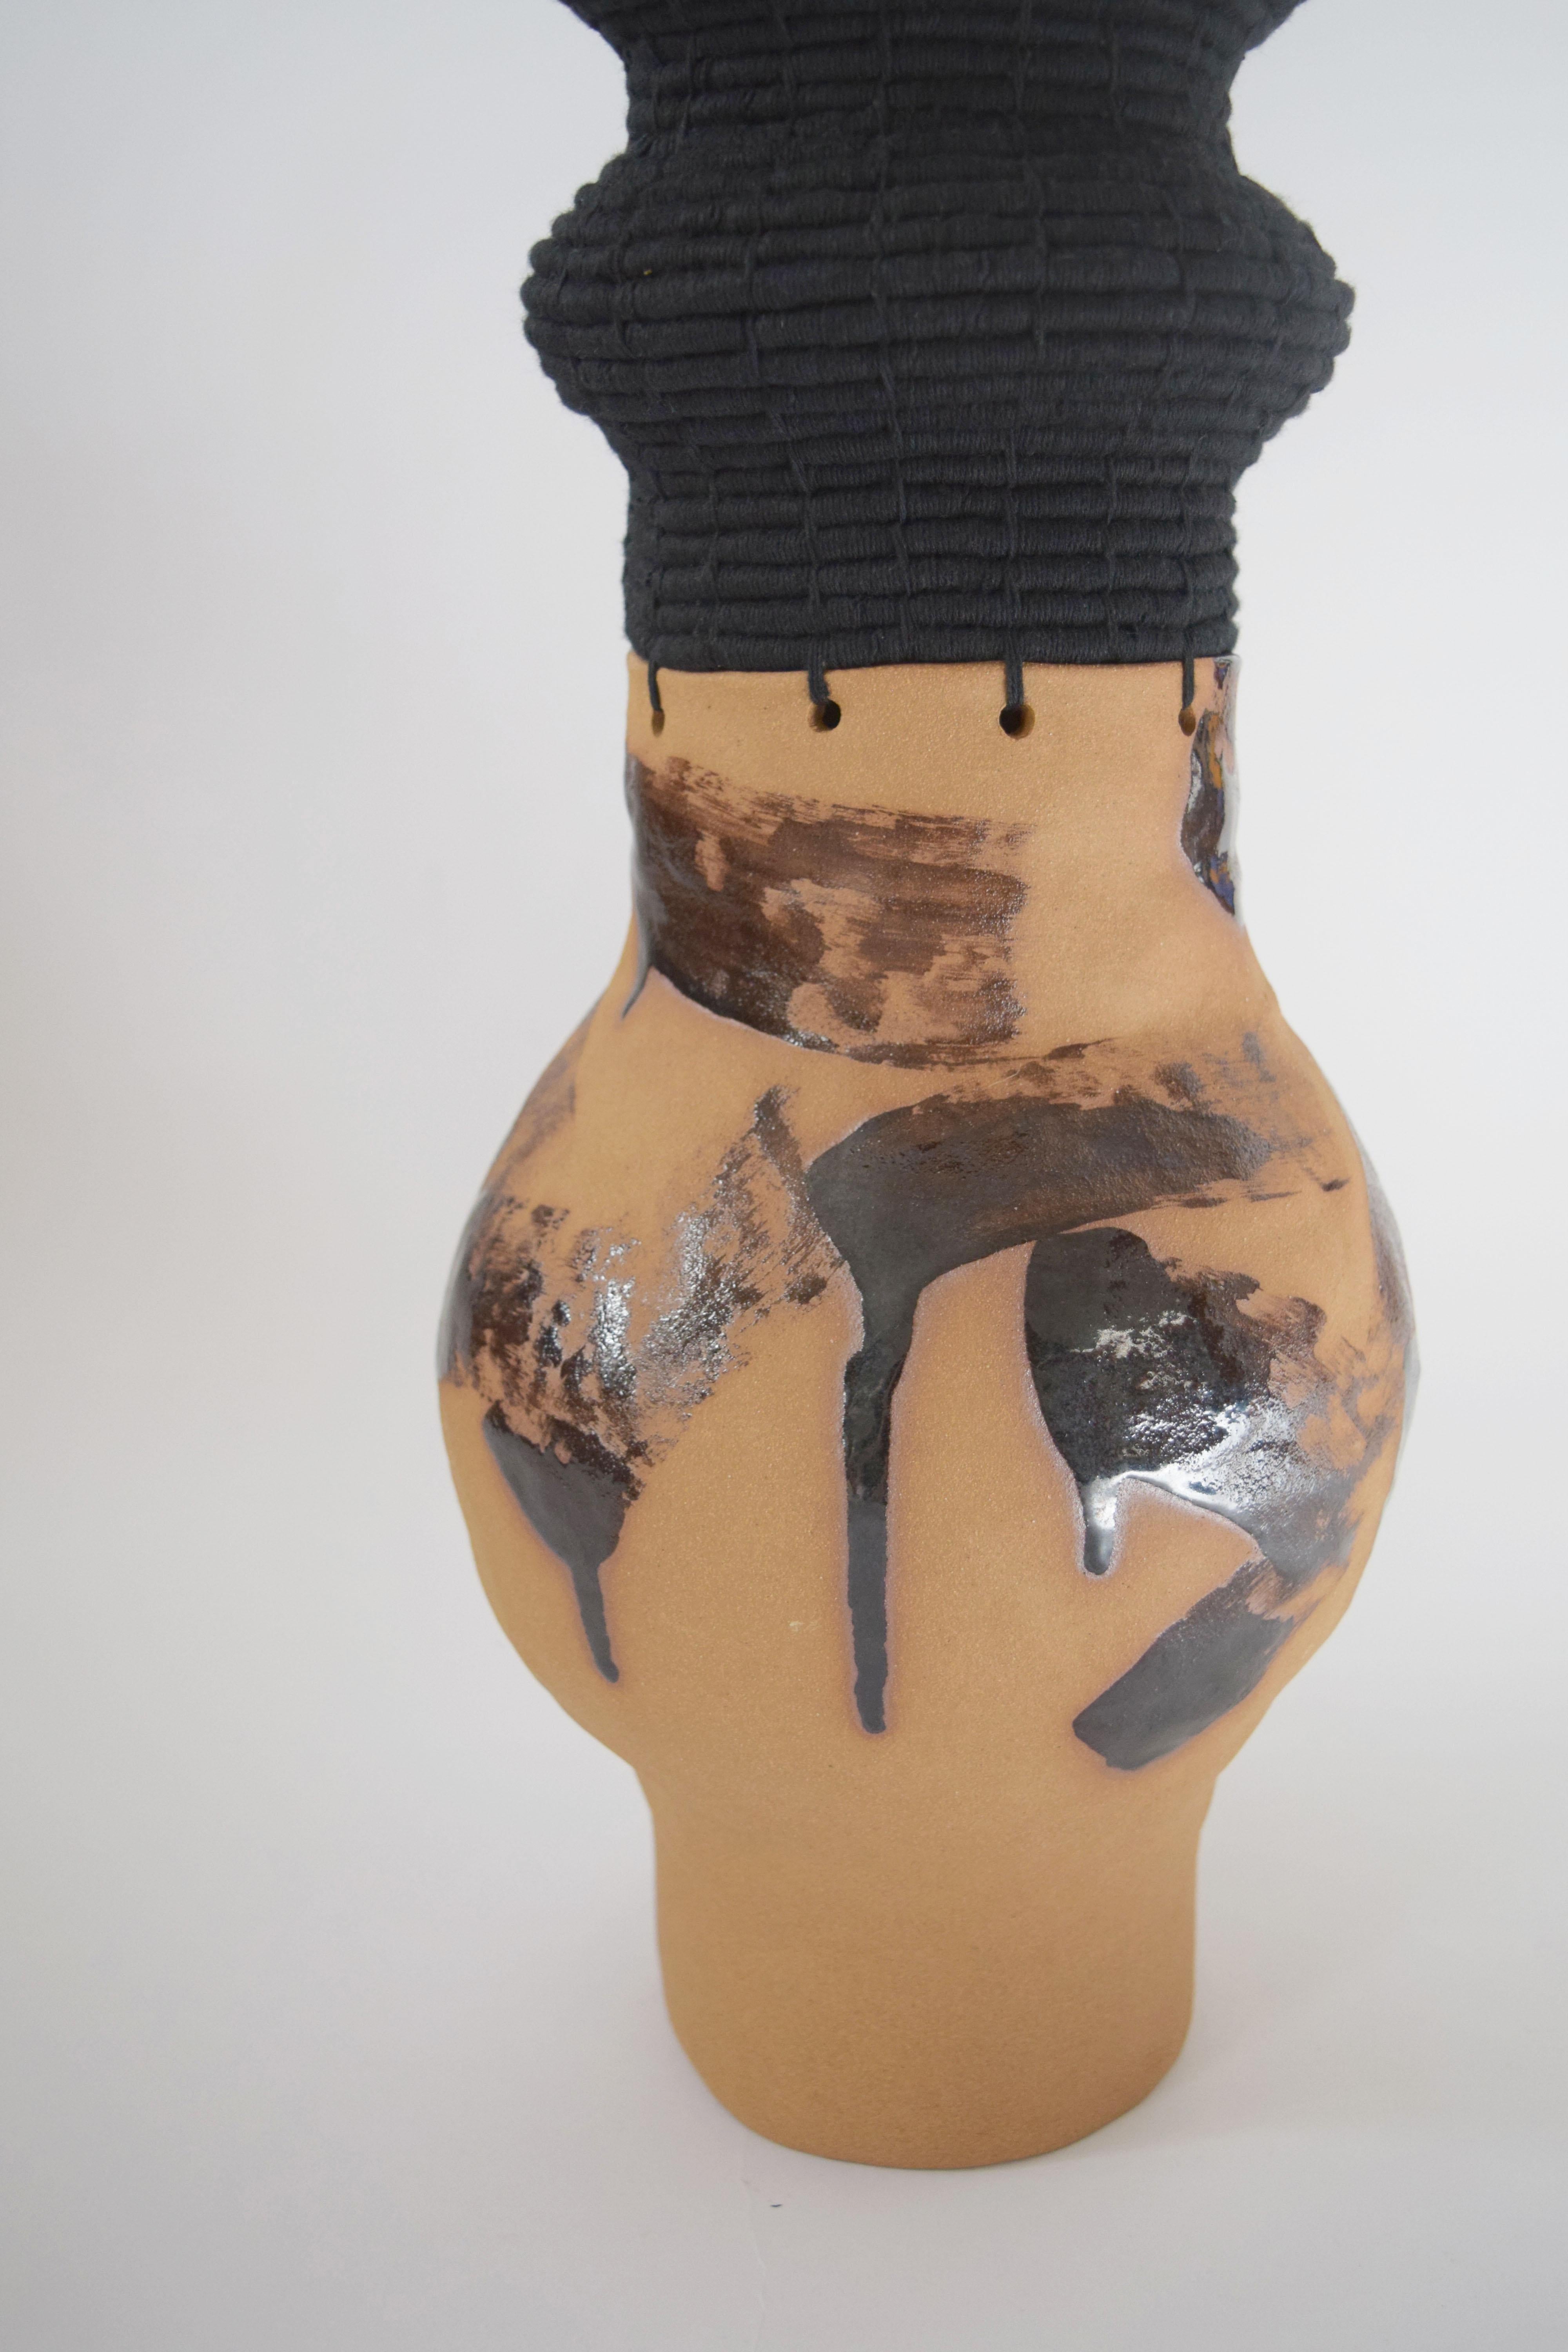 Hand-Crafted One of a Kind Hand Painted Ceramic and Woven Cotton Vessel in Natural and Black